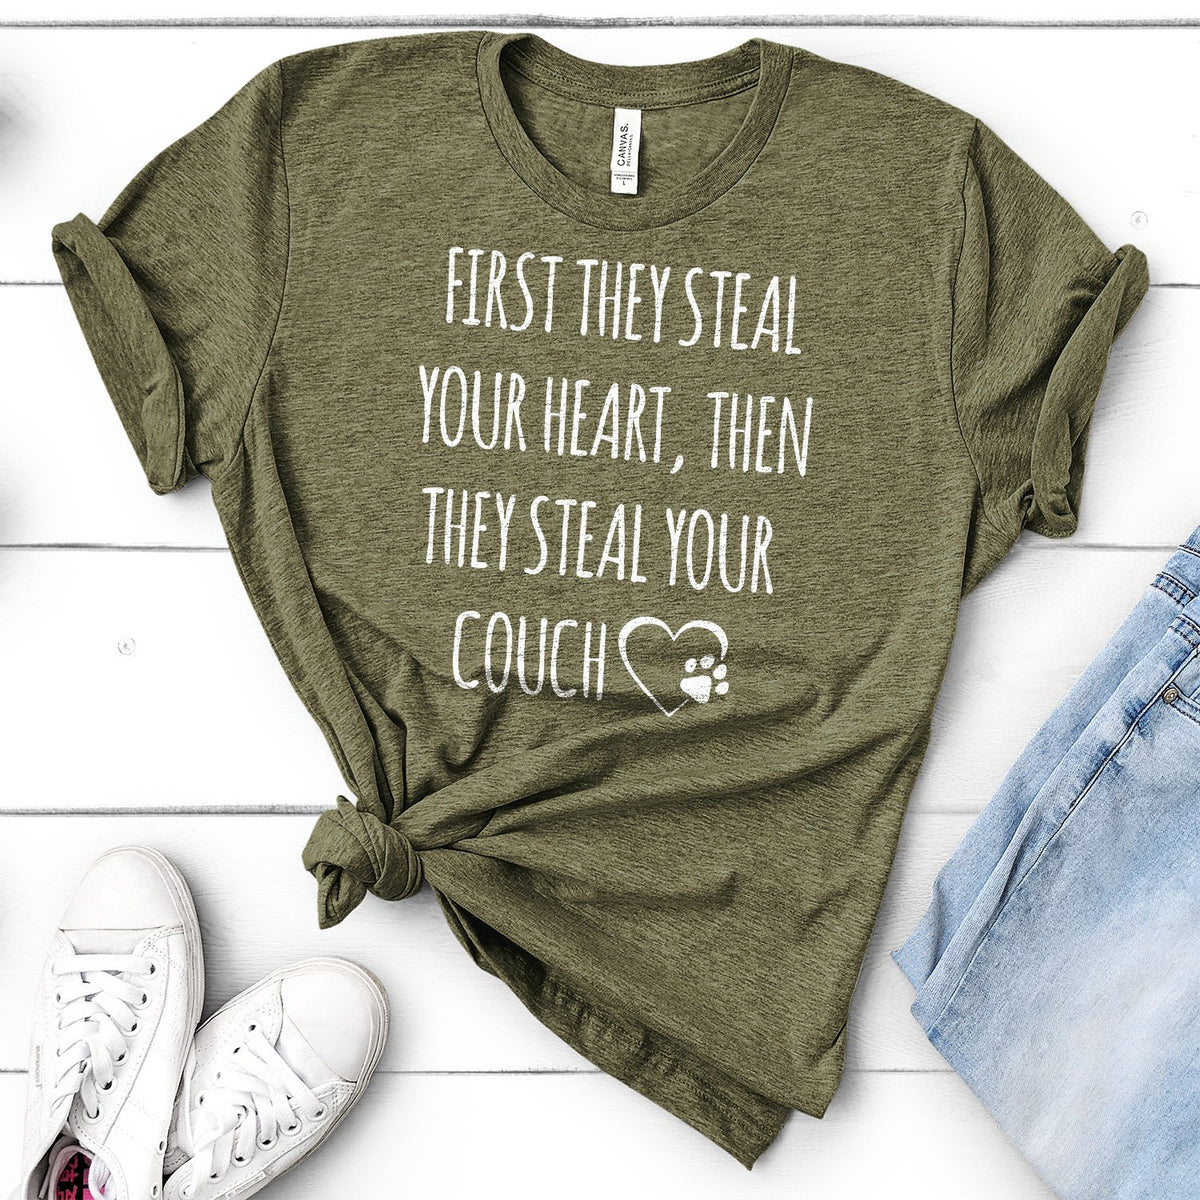 First They Steal Your Heart, Then They Steal Your Couch - Short Sleeve Tee Shirt